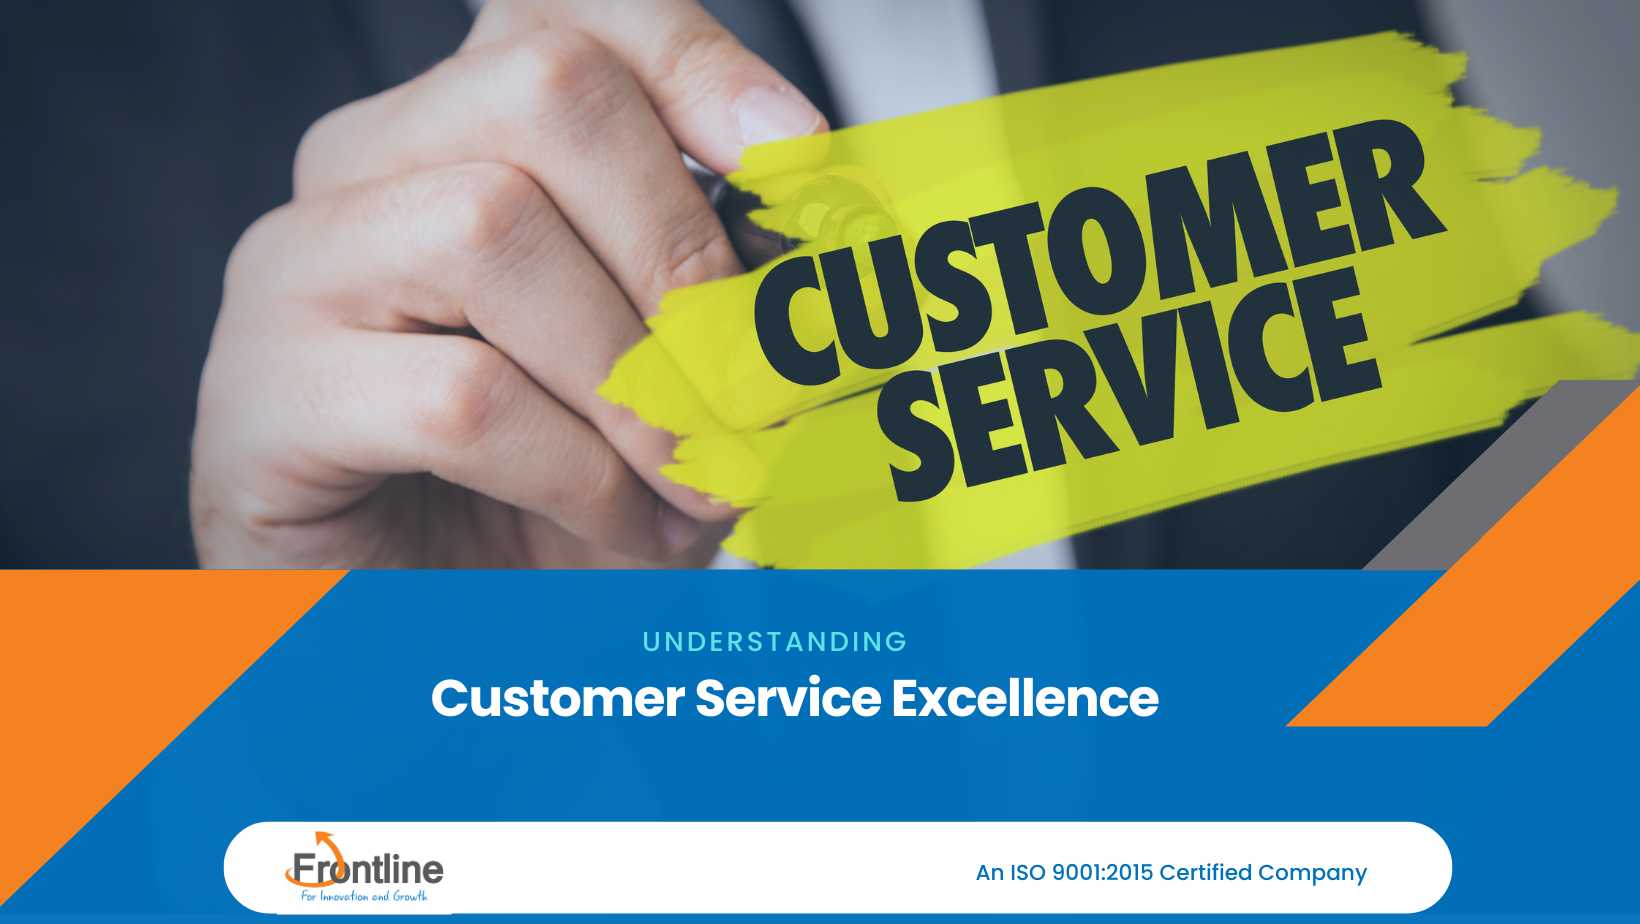 Customer service Excellence